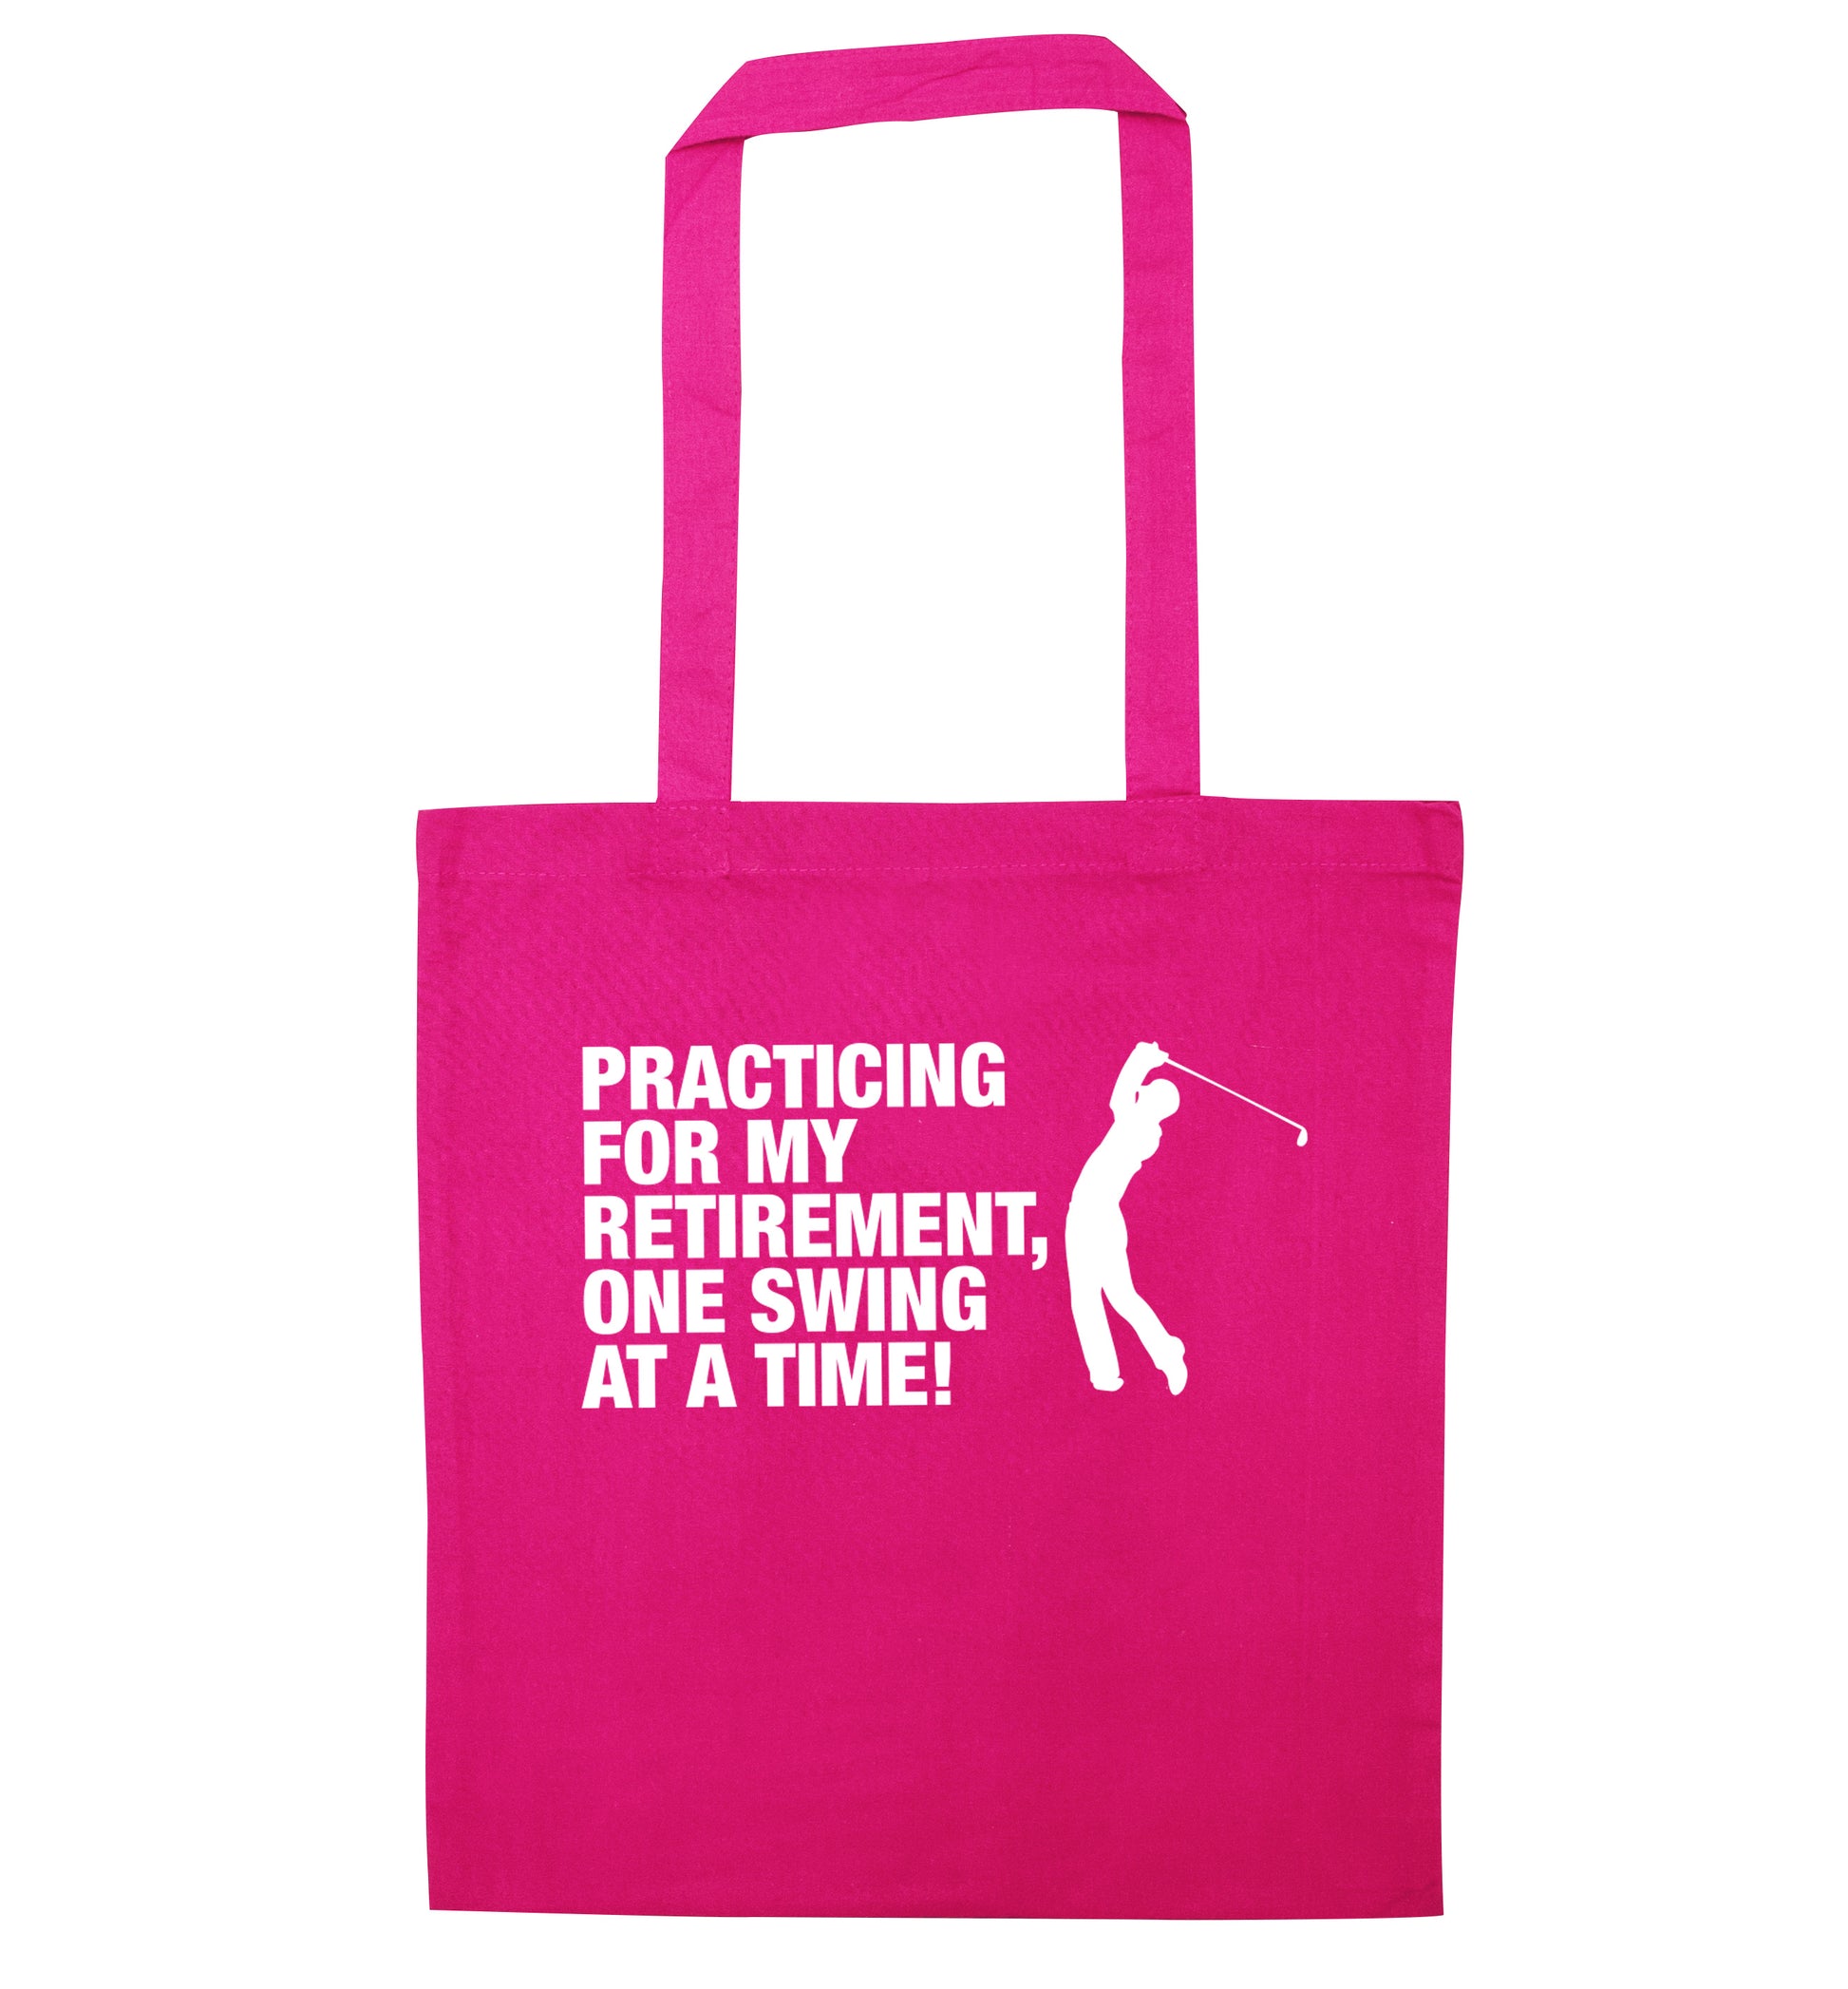 Practicing for my retirement one swing at a time pink tote bag